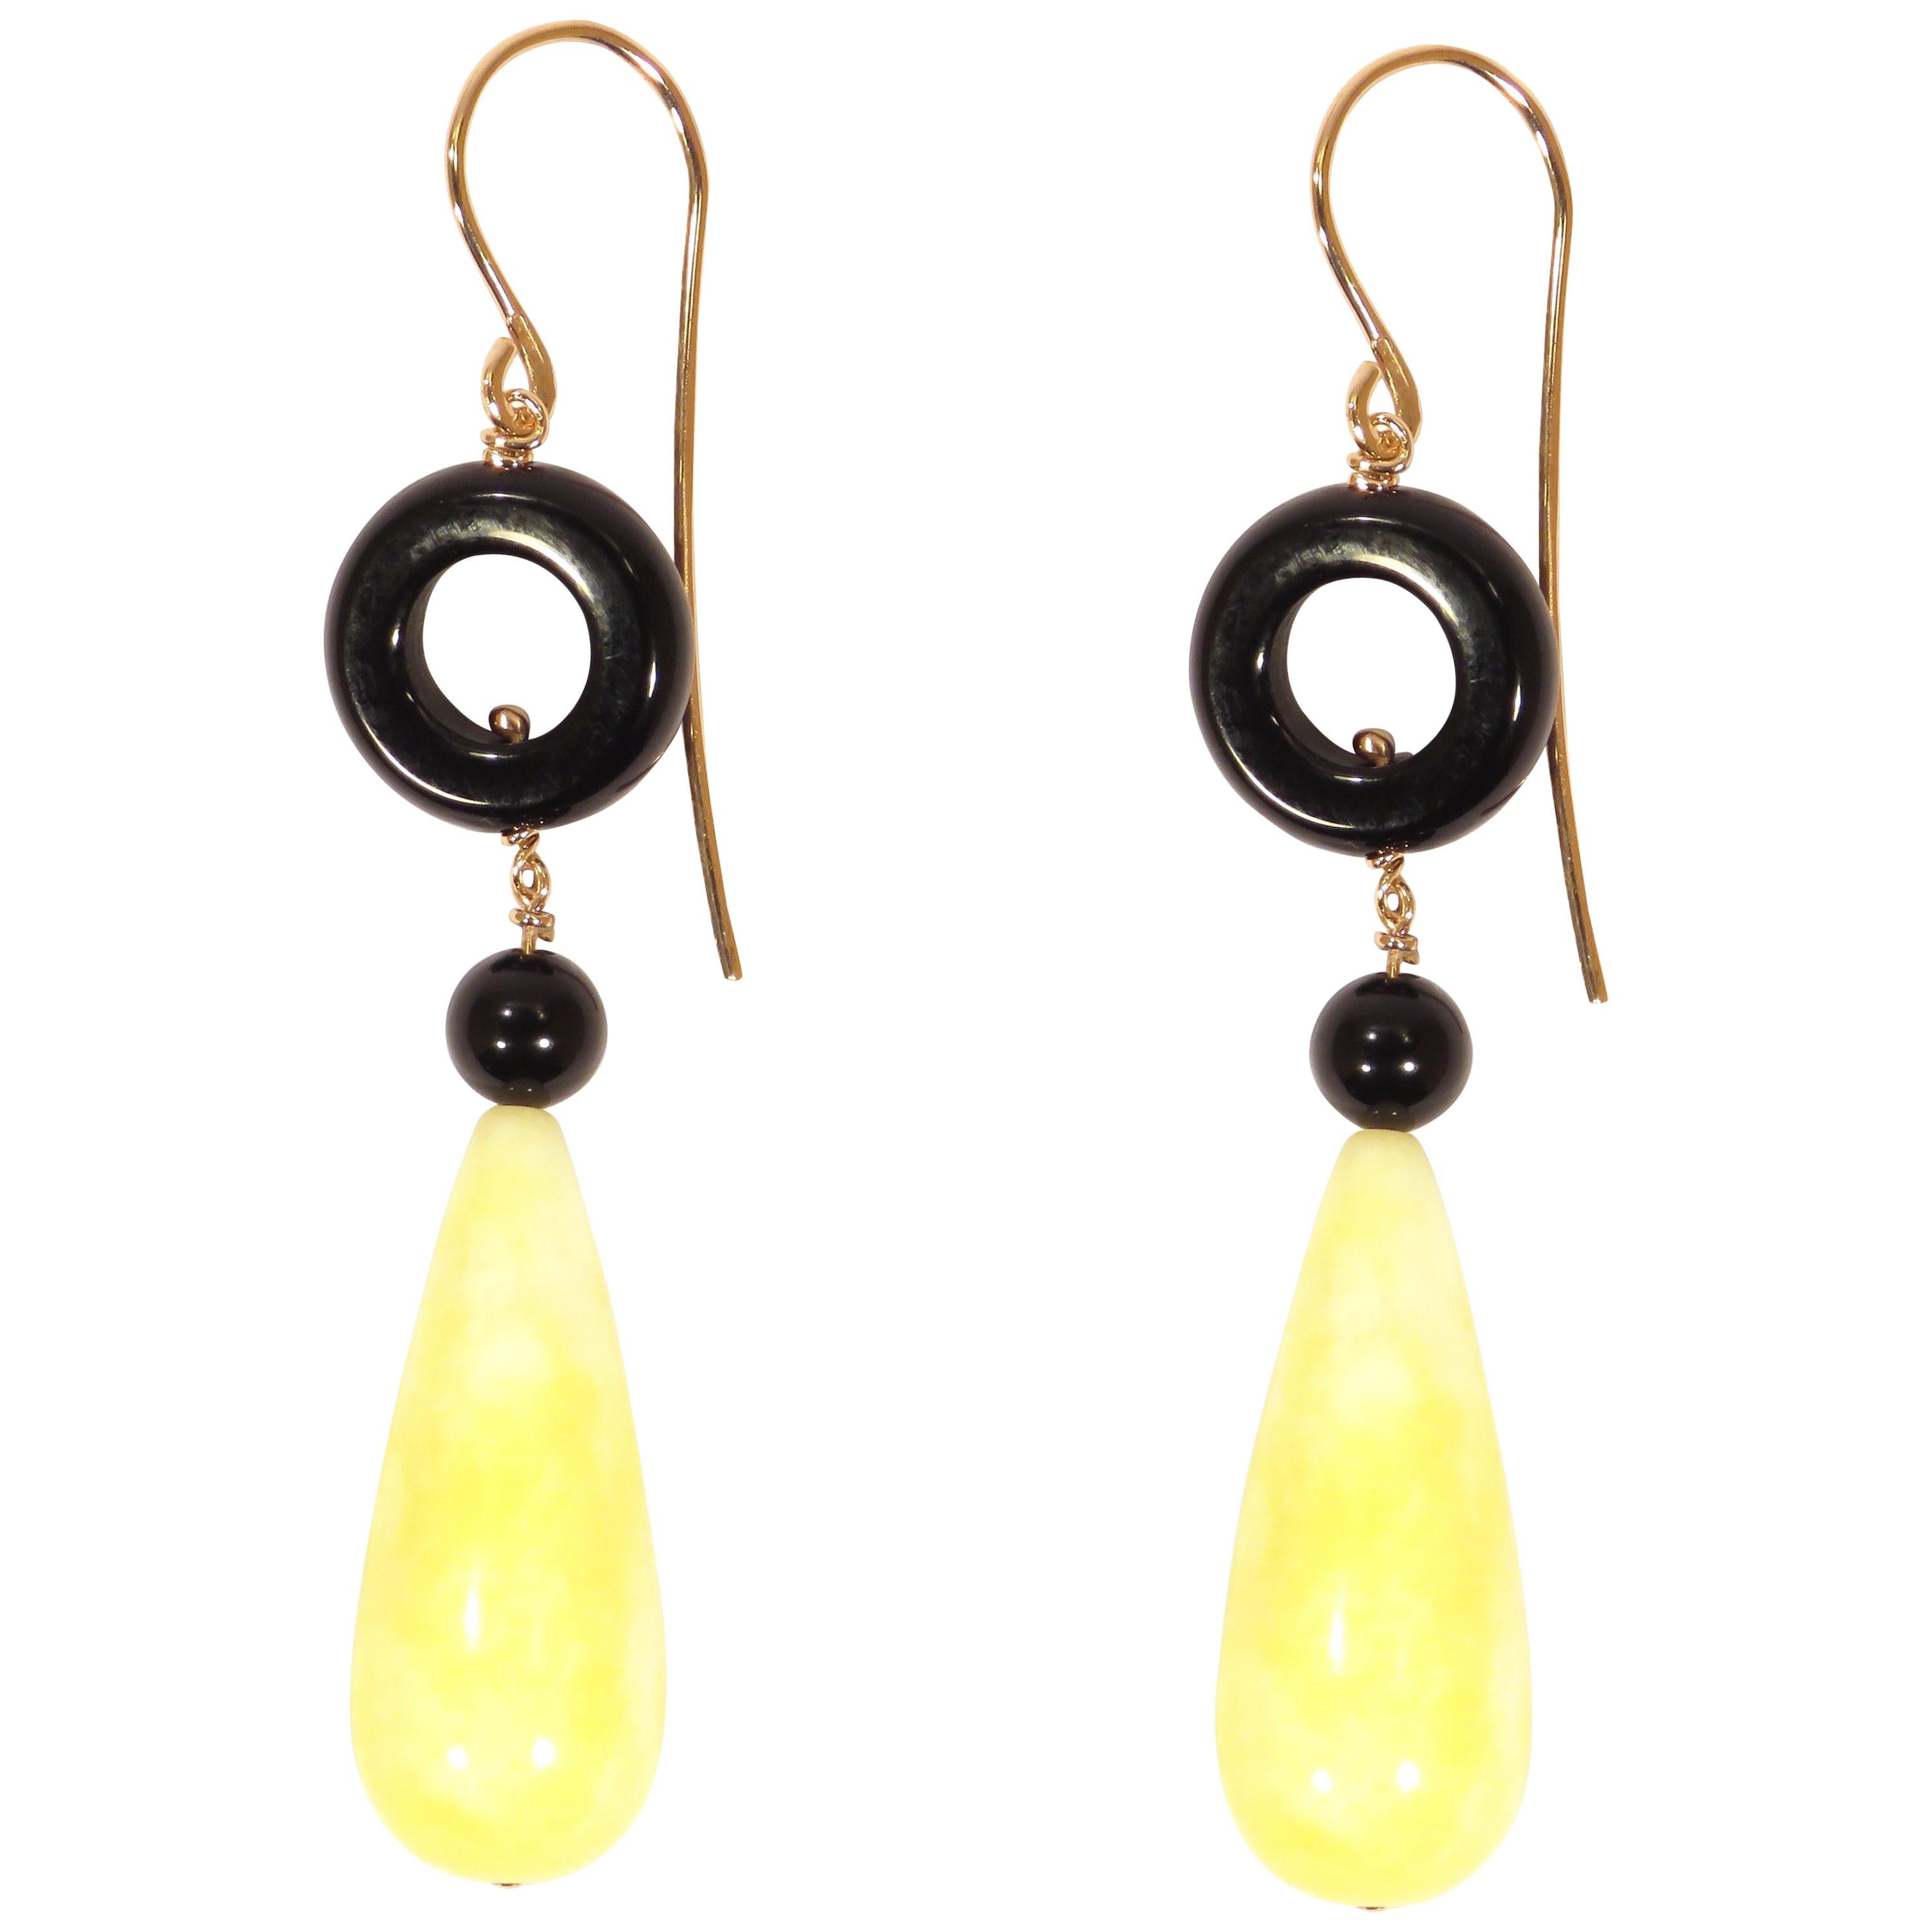 Yellow Agate Onyx Rose Gold Earrings Handcrafted in Italy by Botta Gioielli